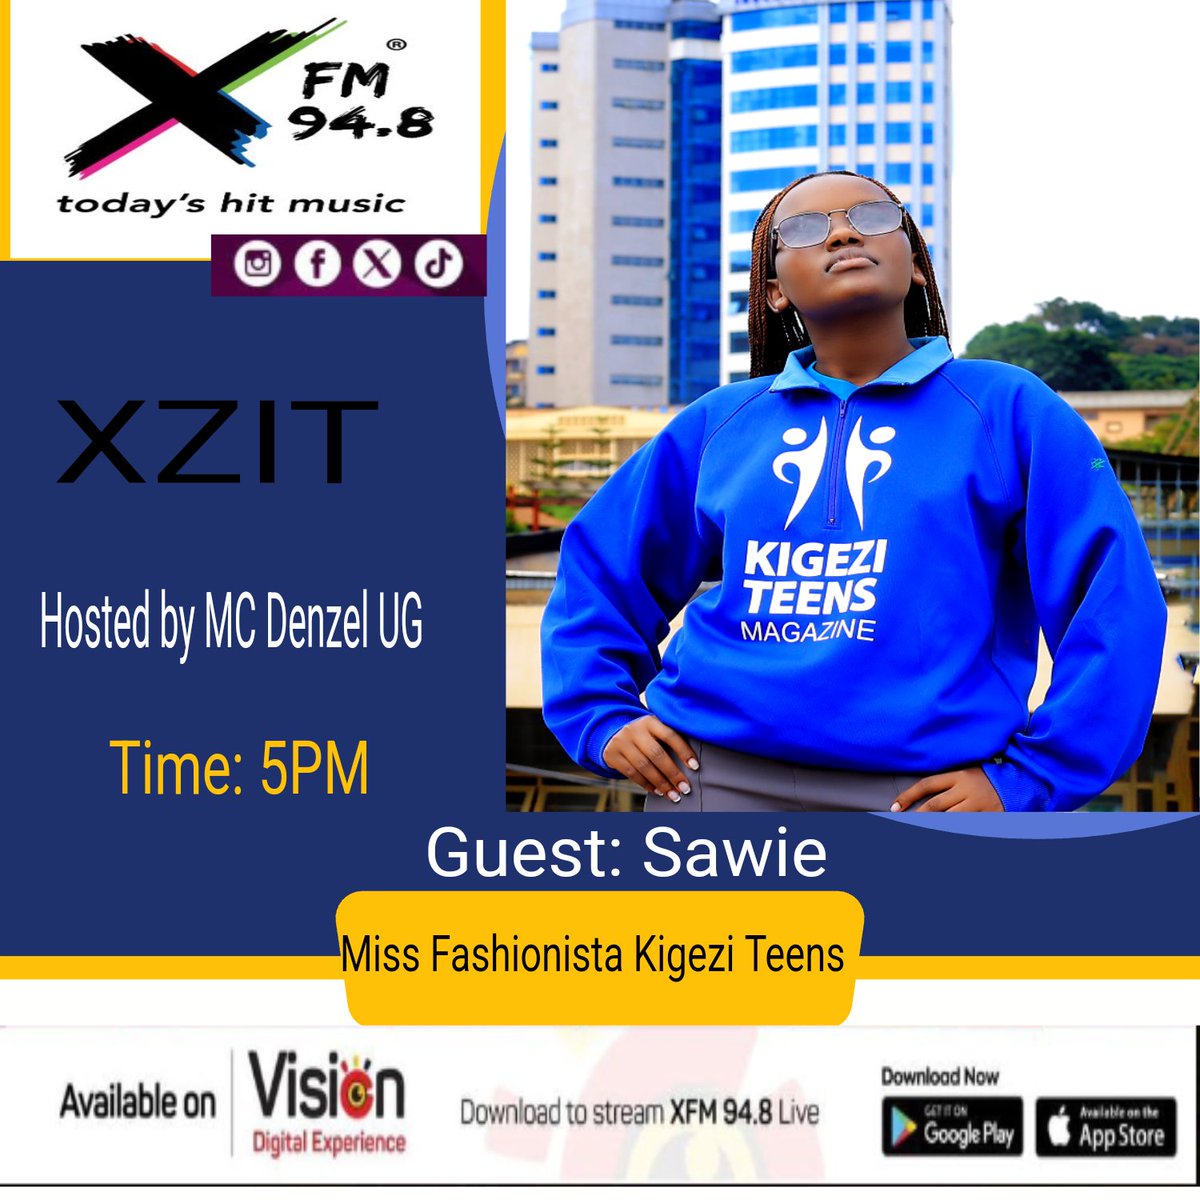 Today 5pm , our Fashion model  Sawie will be hosted on 94.8X FM -Kampala.
Tune in to know all the details about Kigezi Teens Magazine and how you can participate in our forthcoming editions.
Program: XZIT
Hosted by MC Denzel UG.
Tune in!📻

We are Kigezi Teens Magazine 🇺🇬